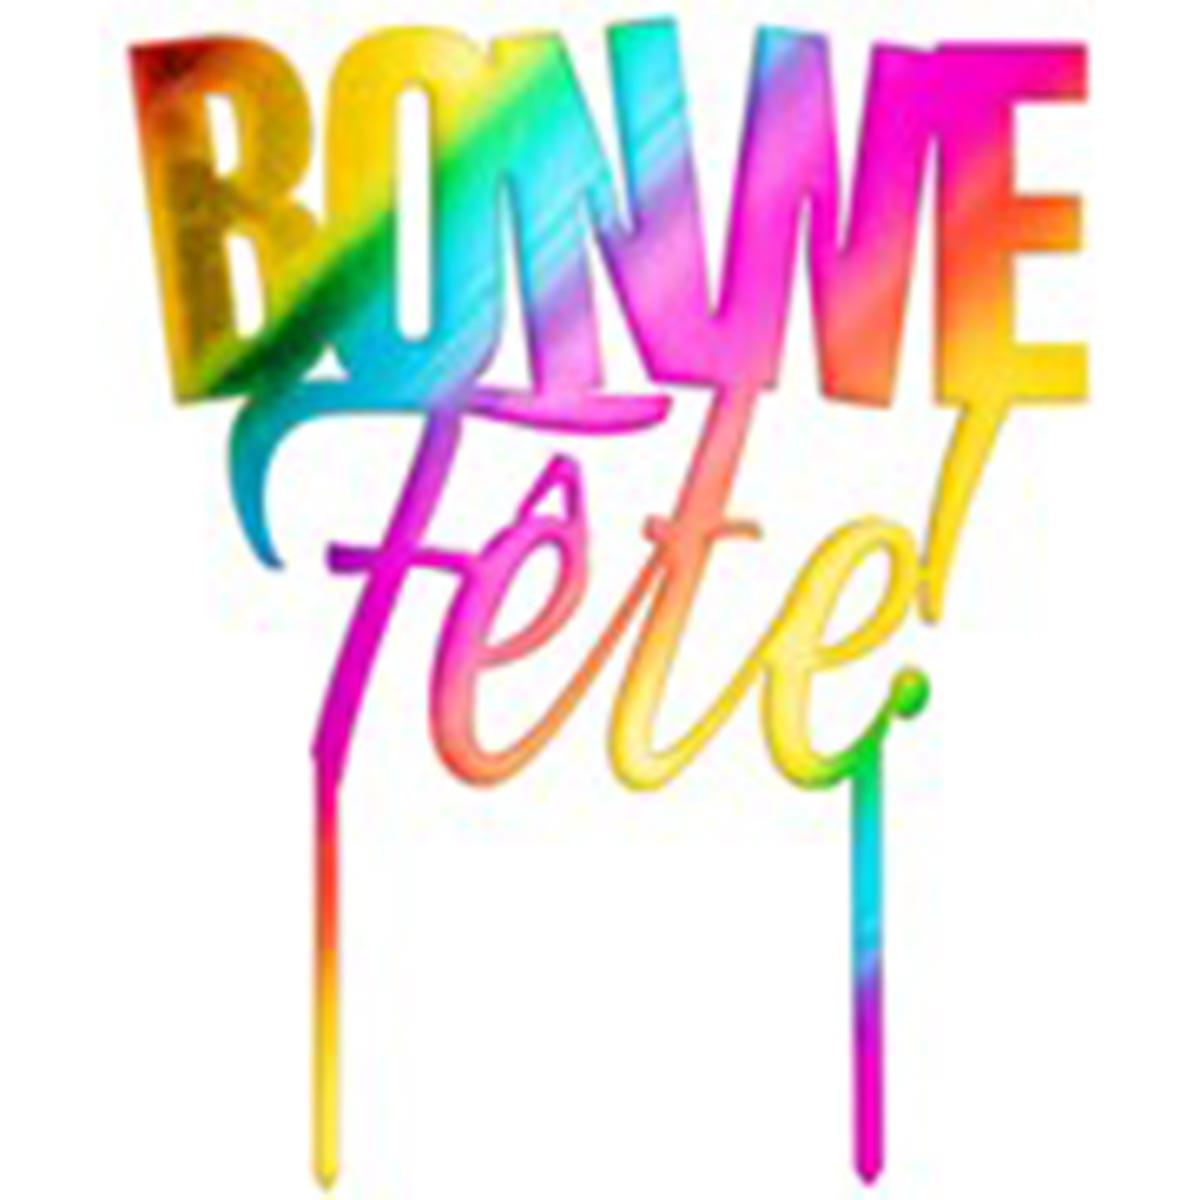 Buy Cake Supplies Rainbow Cake Topper -Bonne Fête sold at Party Expert